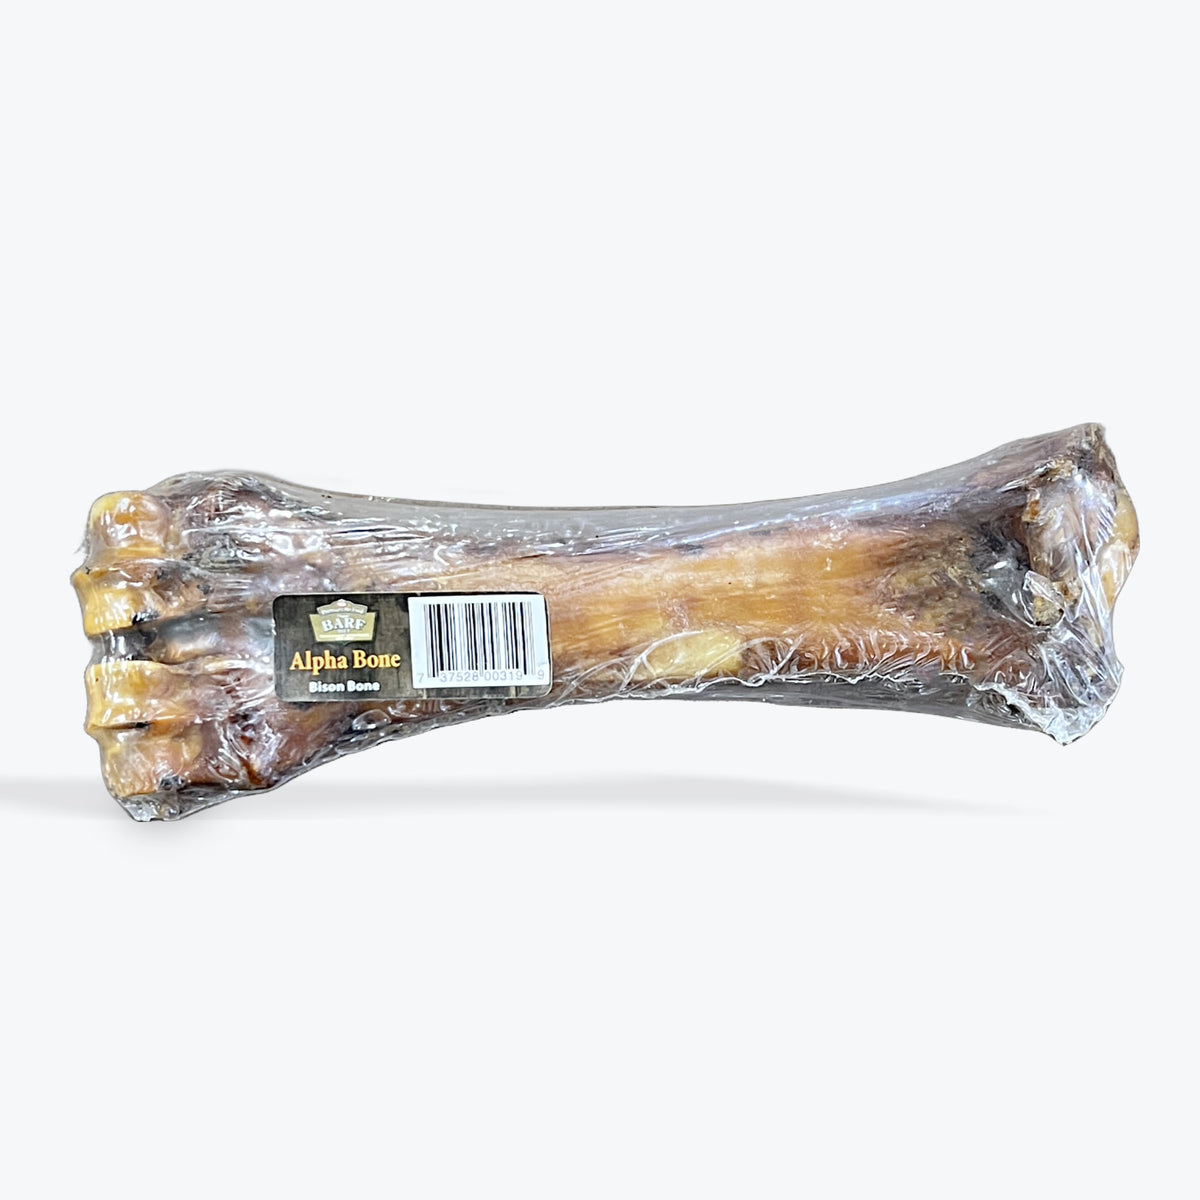 Alpha bone for dogs sealed in plastic wrap